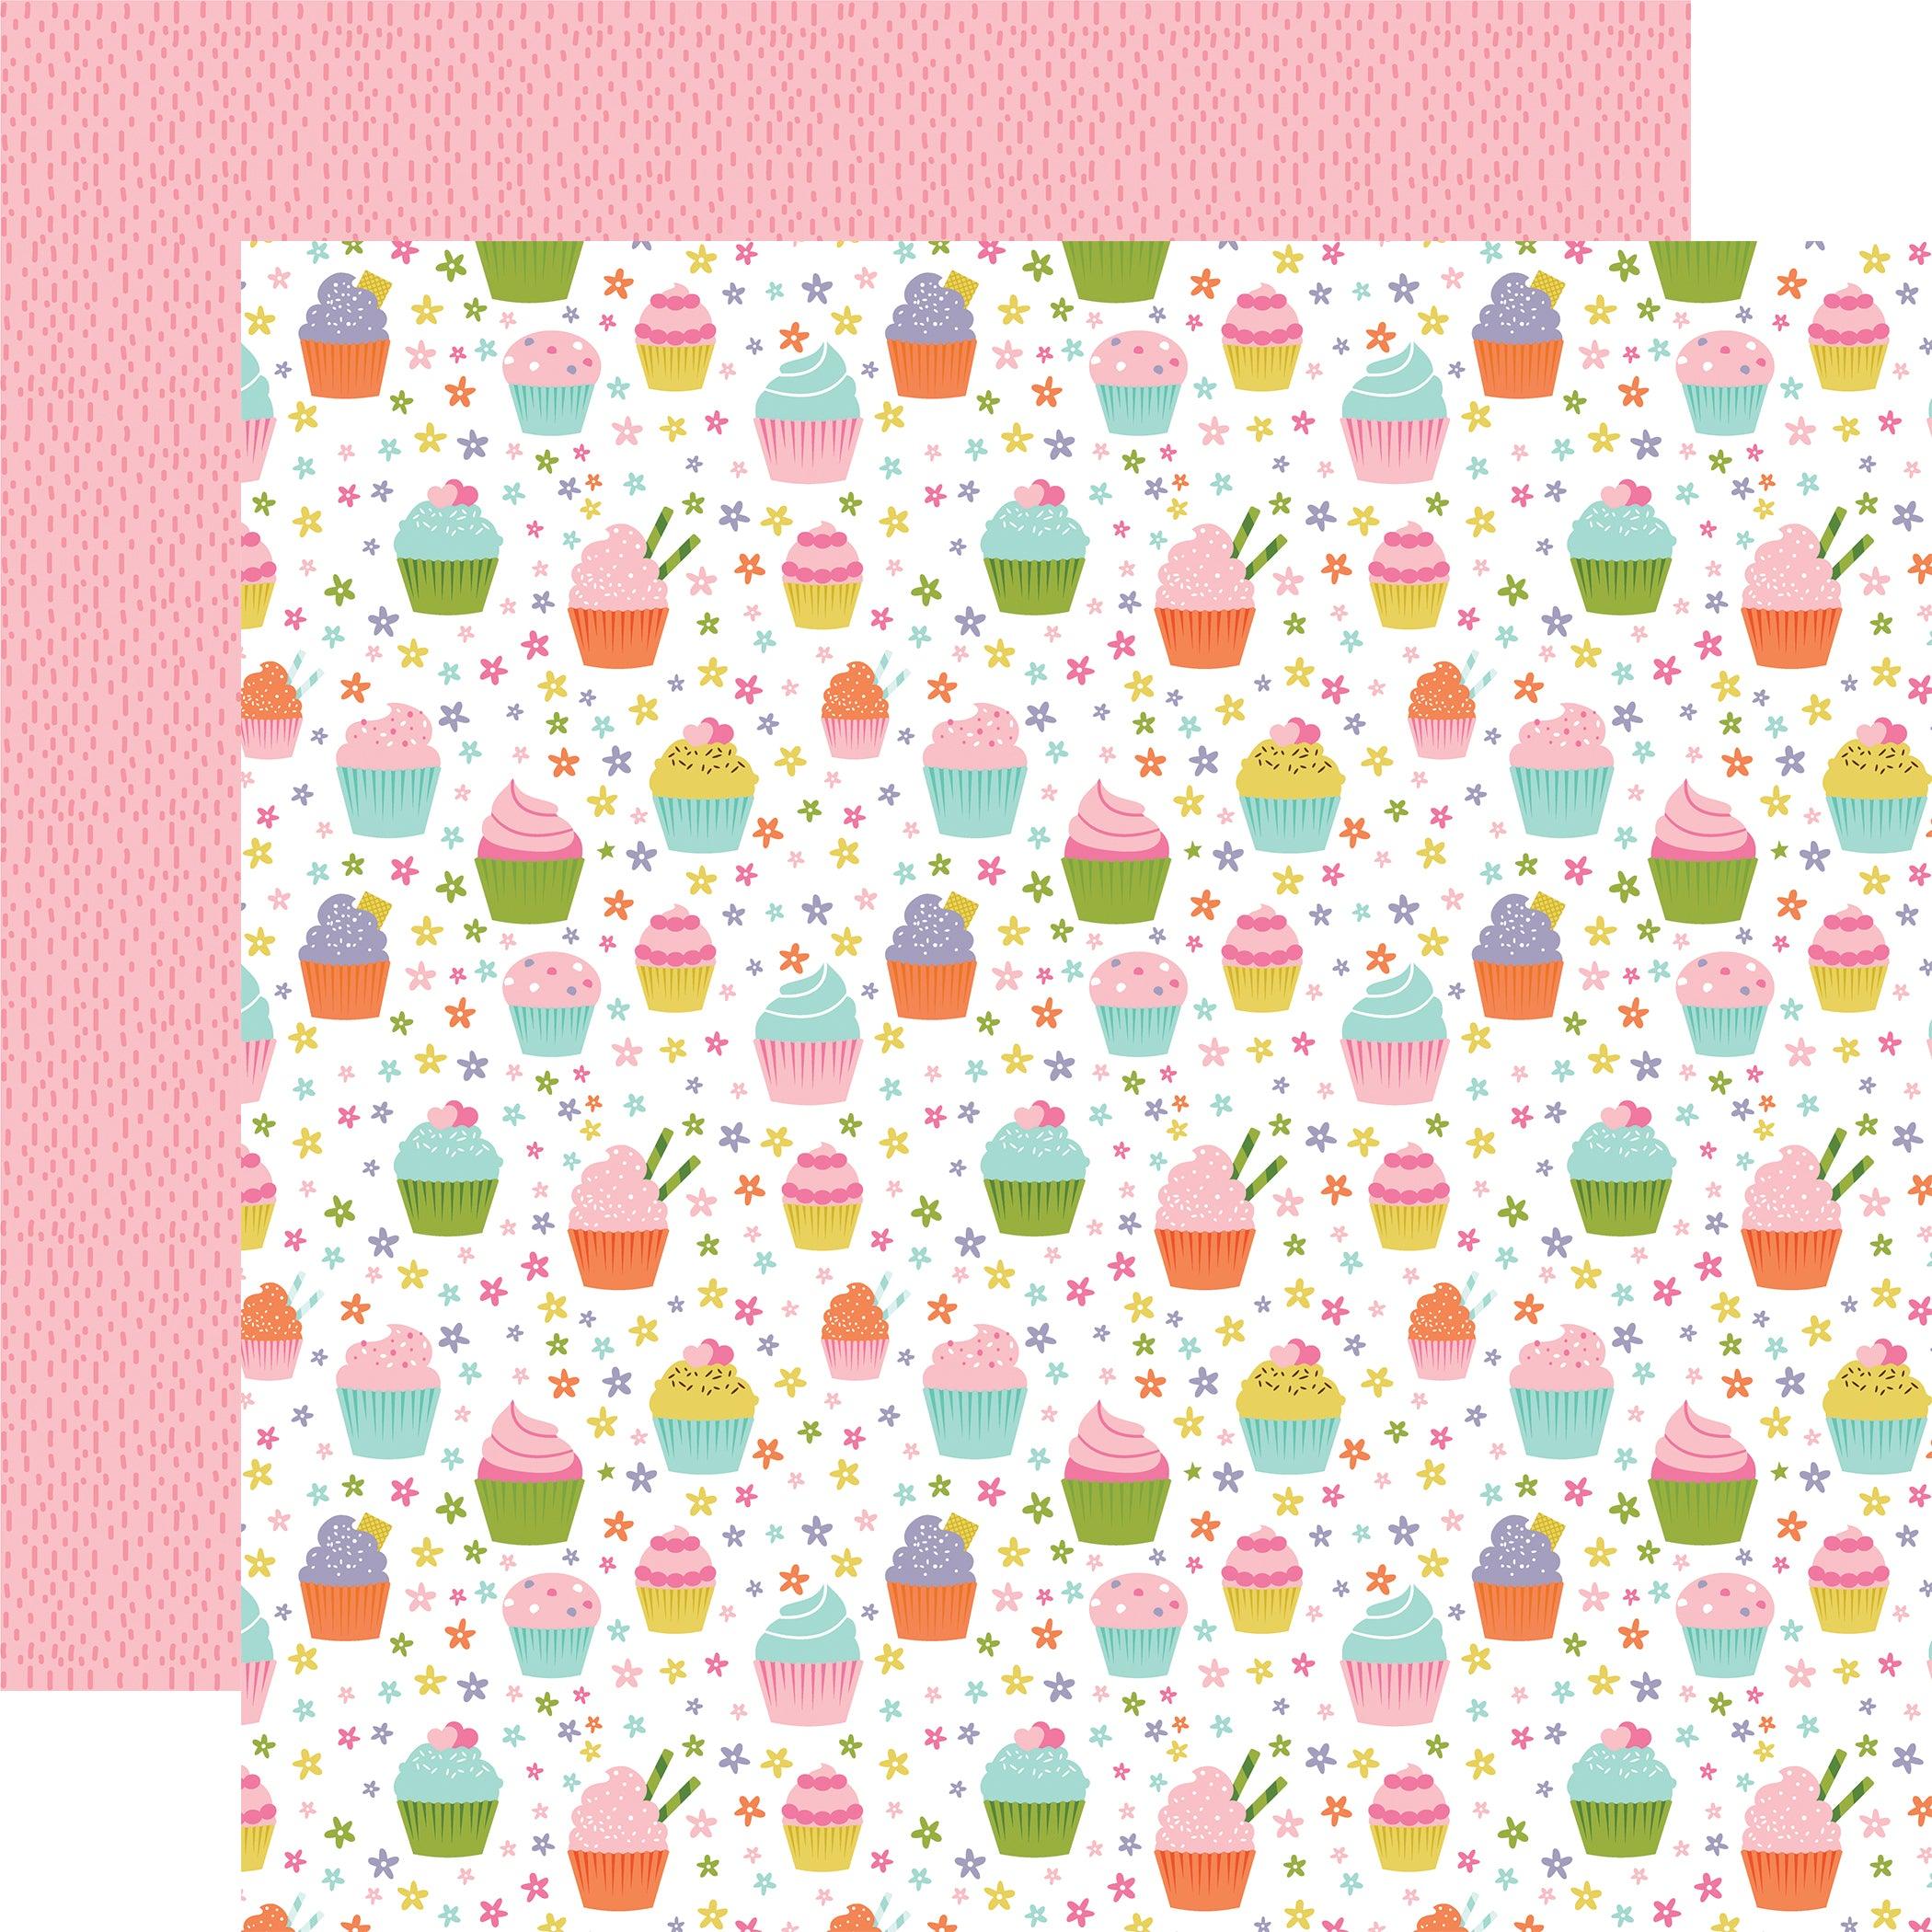 All About A Girl Collection So Sweet 12 x 12 Double-Sided Scrapbook Paper by Echo Park Paper - Scrapbook Supply Companies